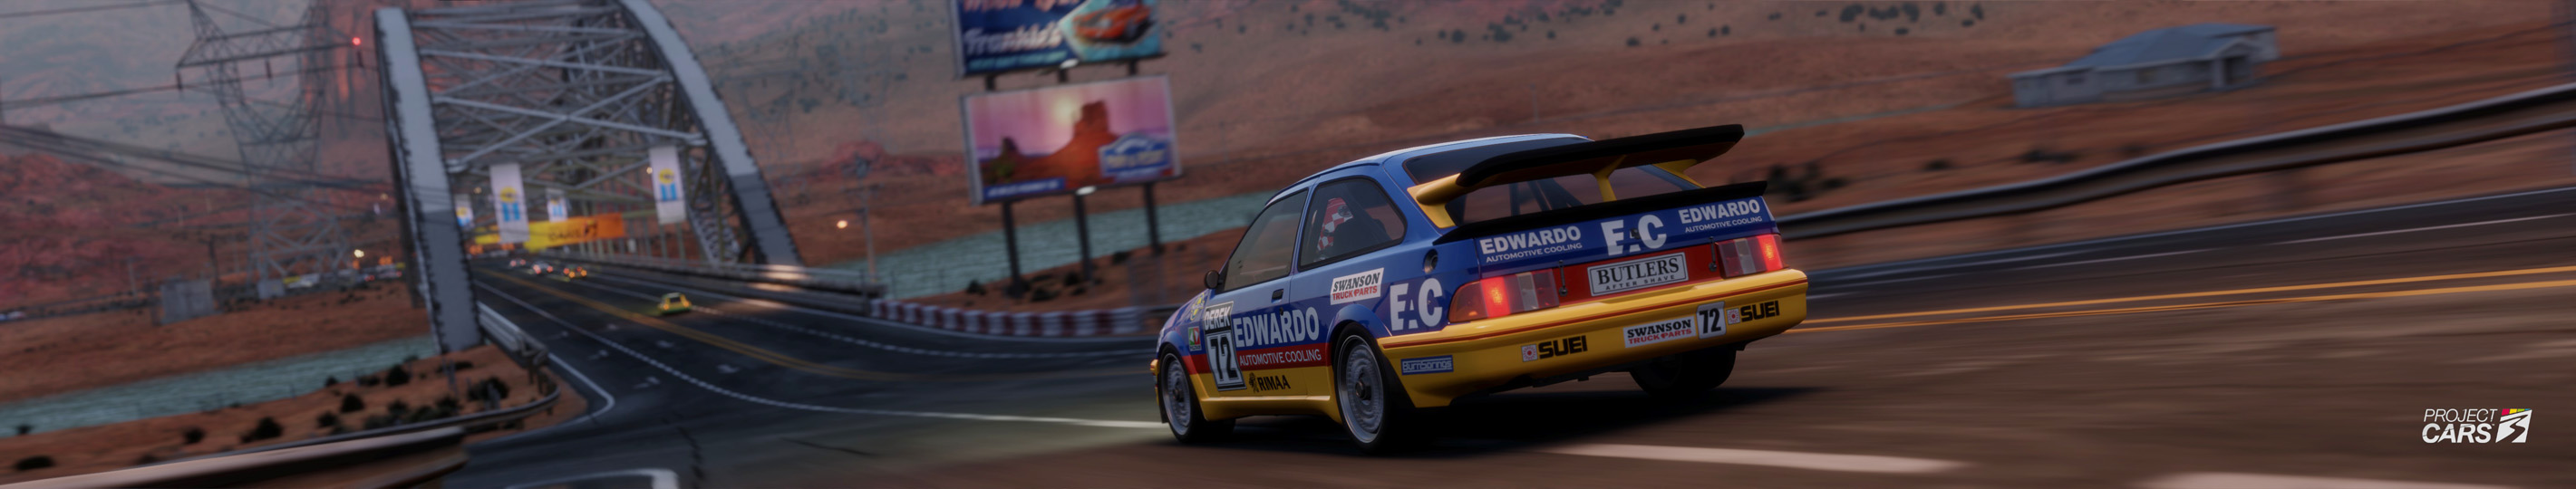 3 PROJECT CARS 3 COSWORTH at MONUMENT CANYON crop copy.jpg